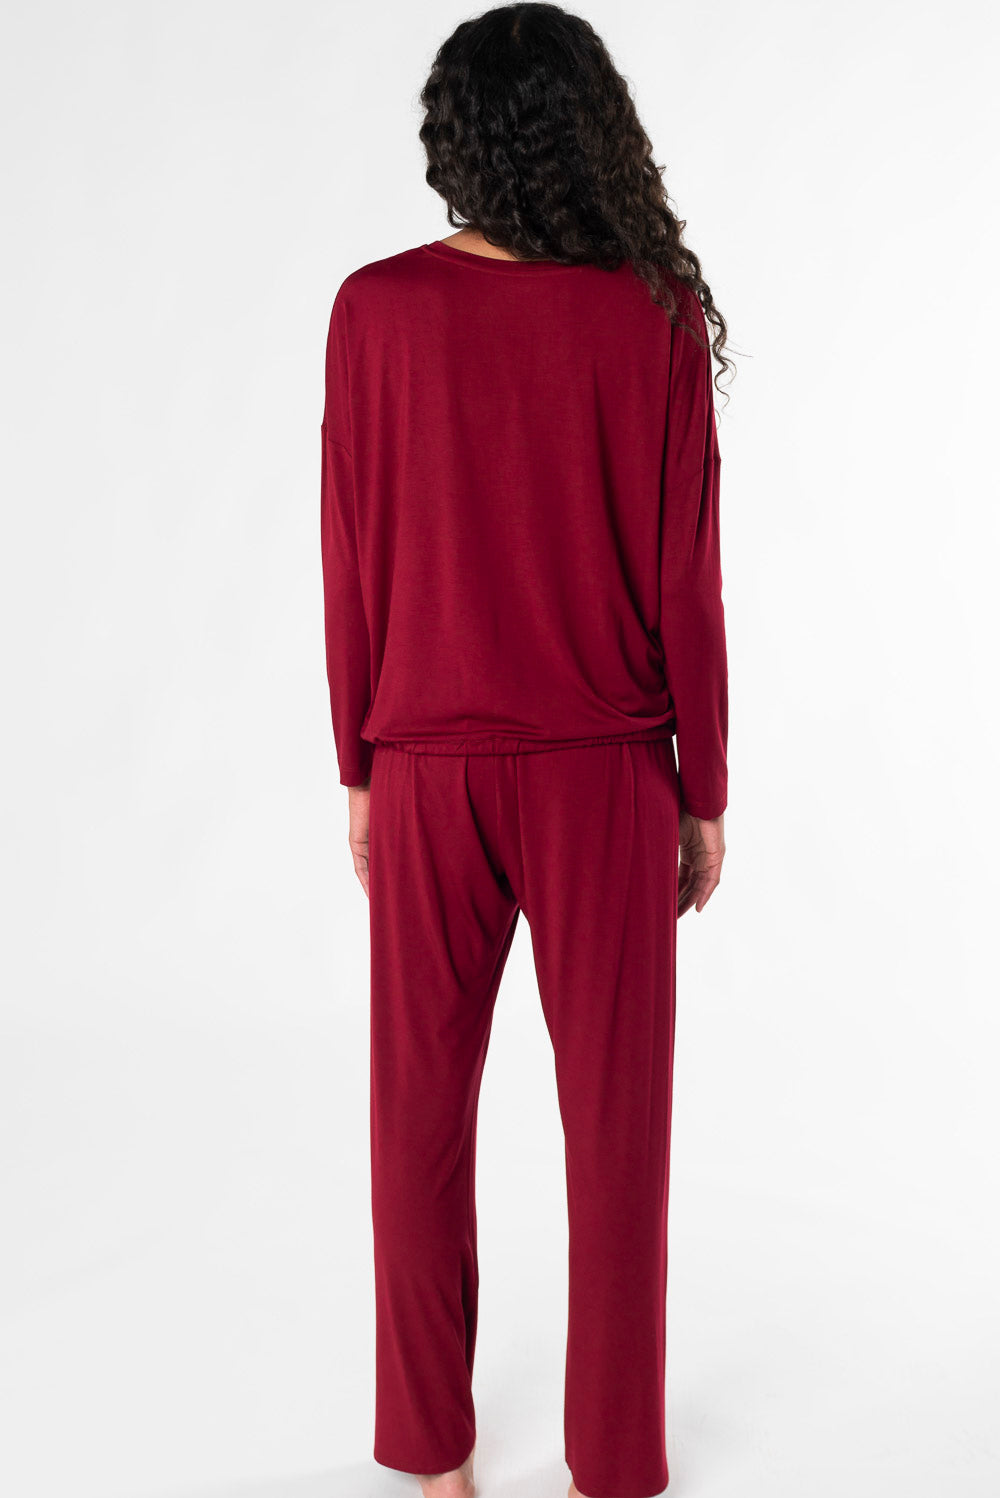 Bamboo two piece v-neck lounge set with straight leg pant - red